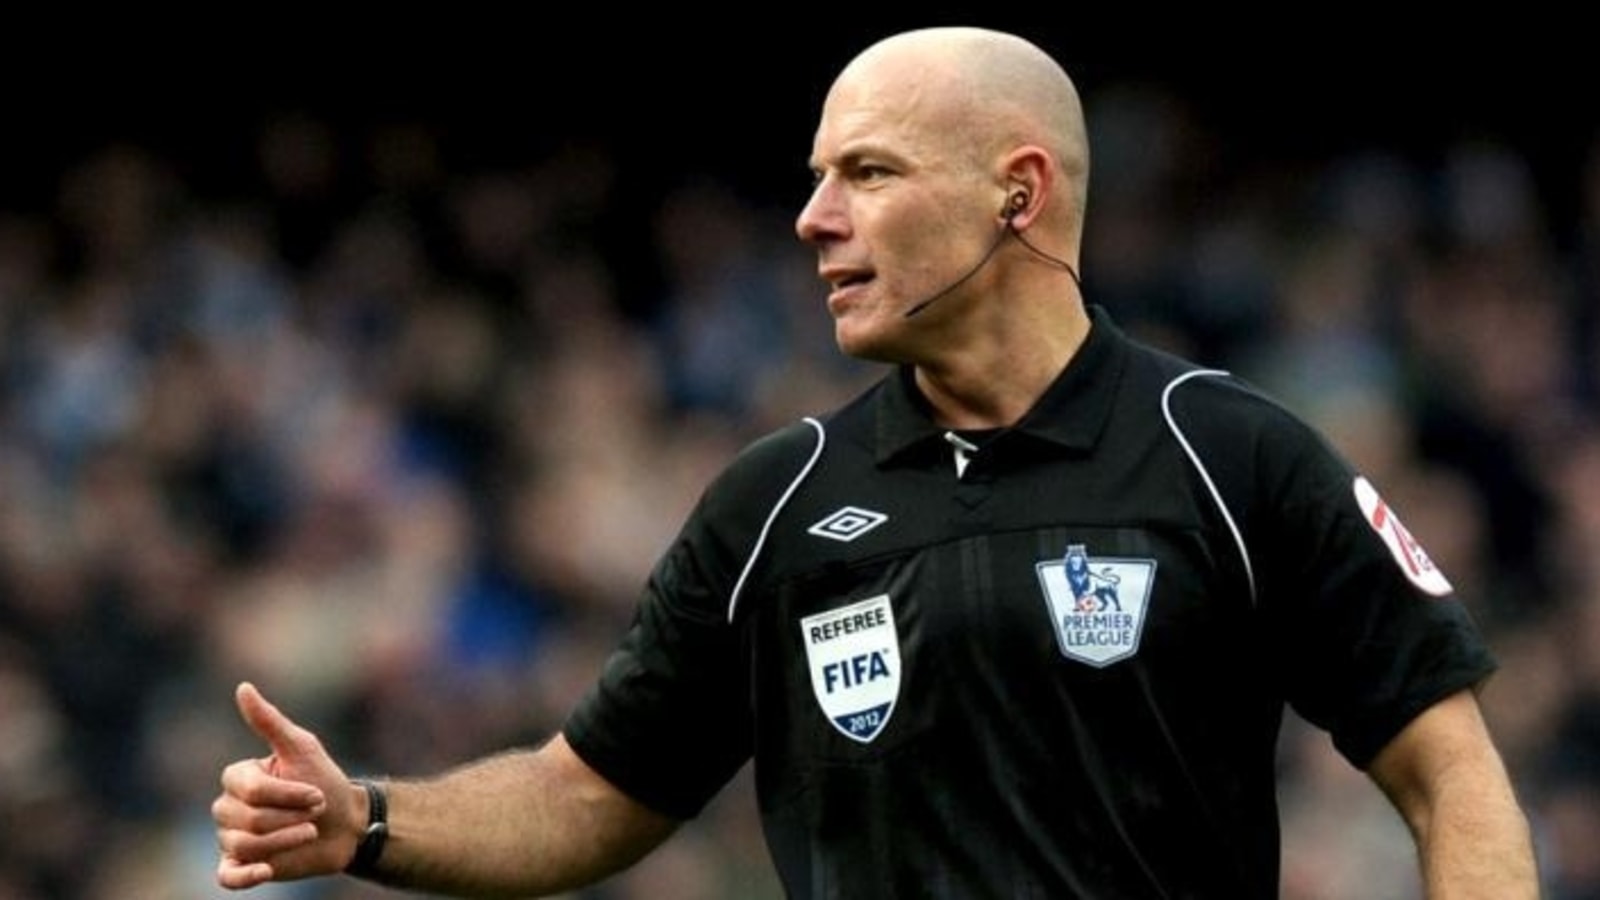 howard-webb-leaving-mls-wants-to-give-more-insight-as-premier-league-refereeing-head